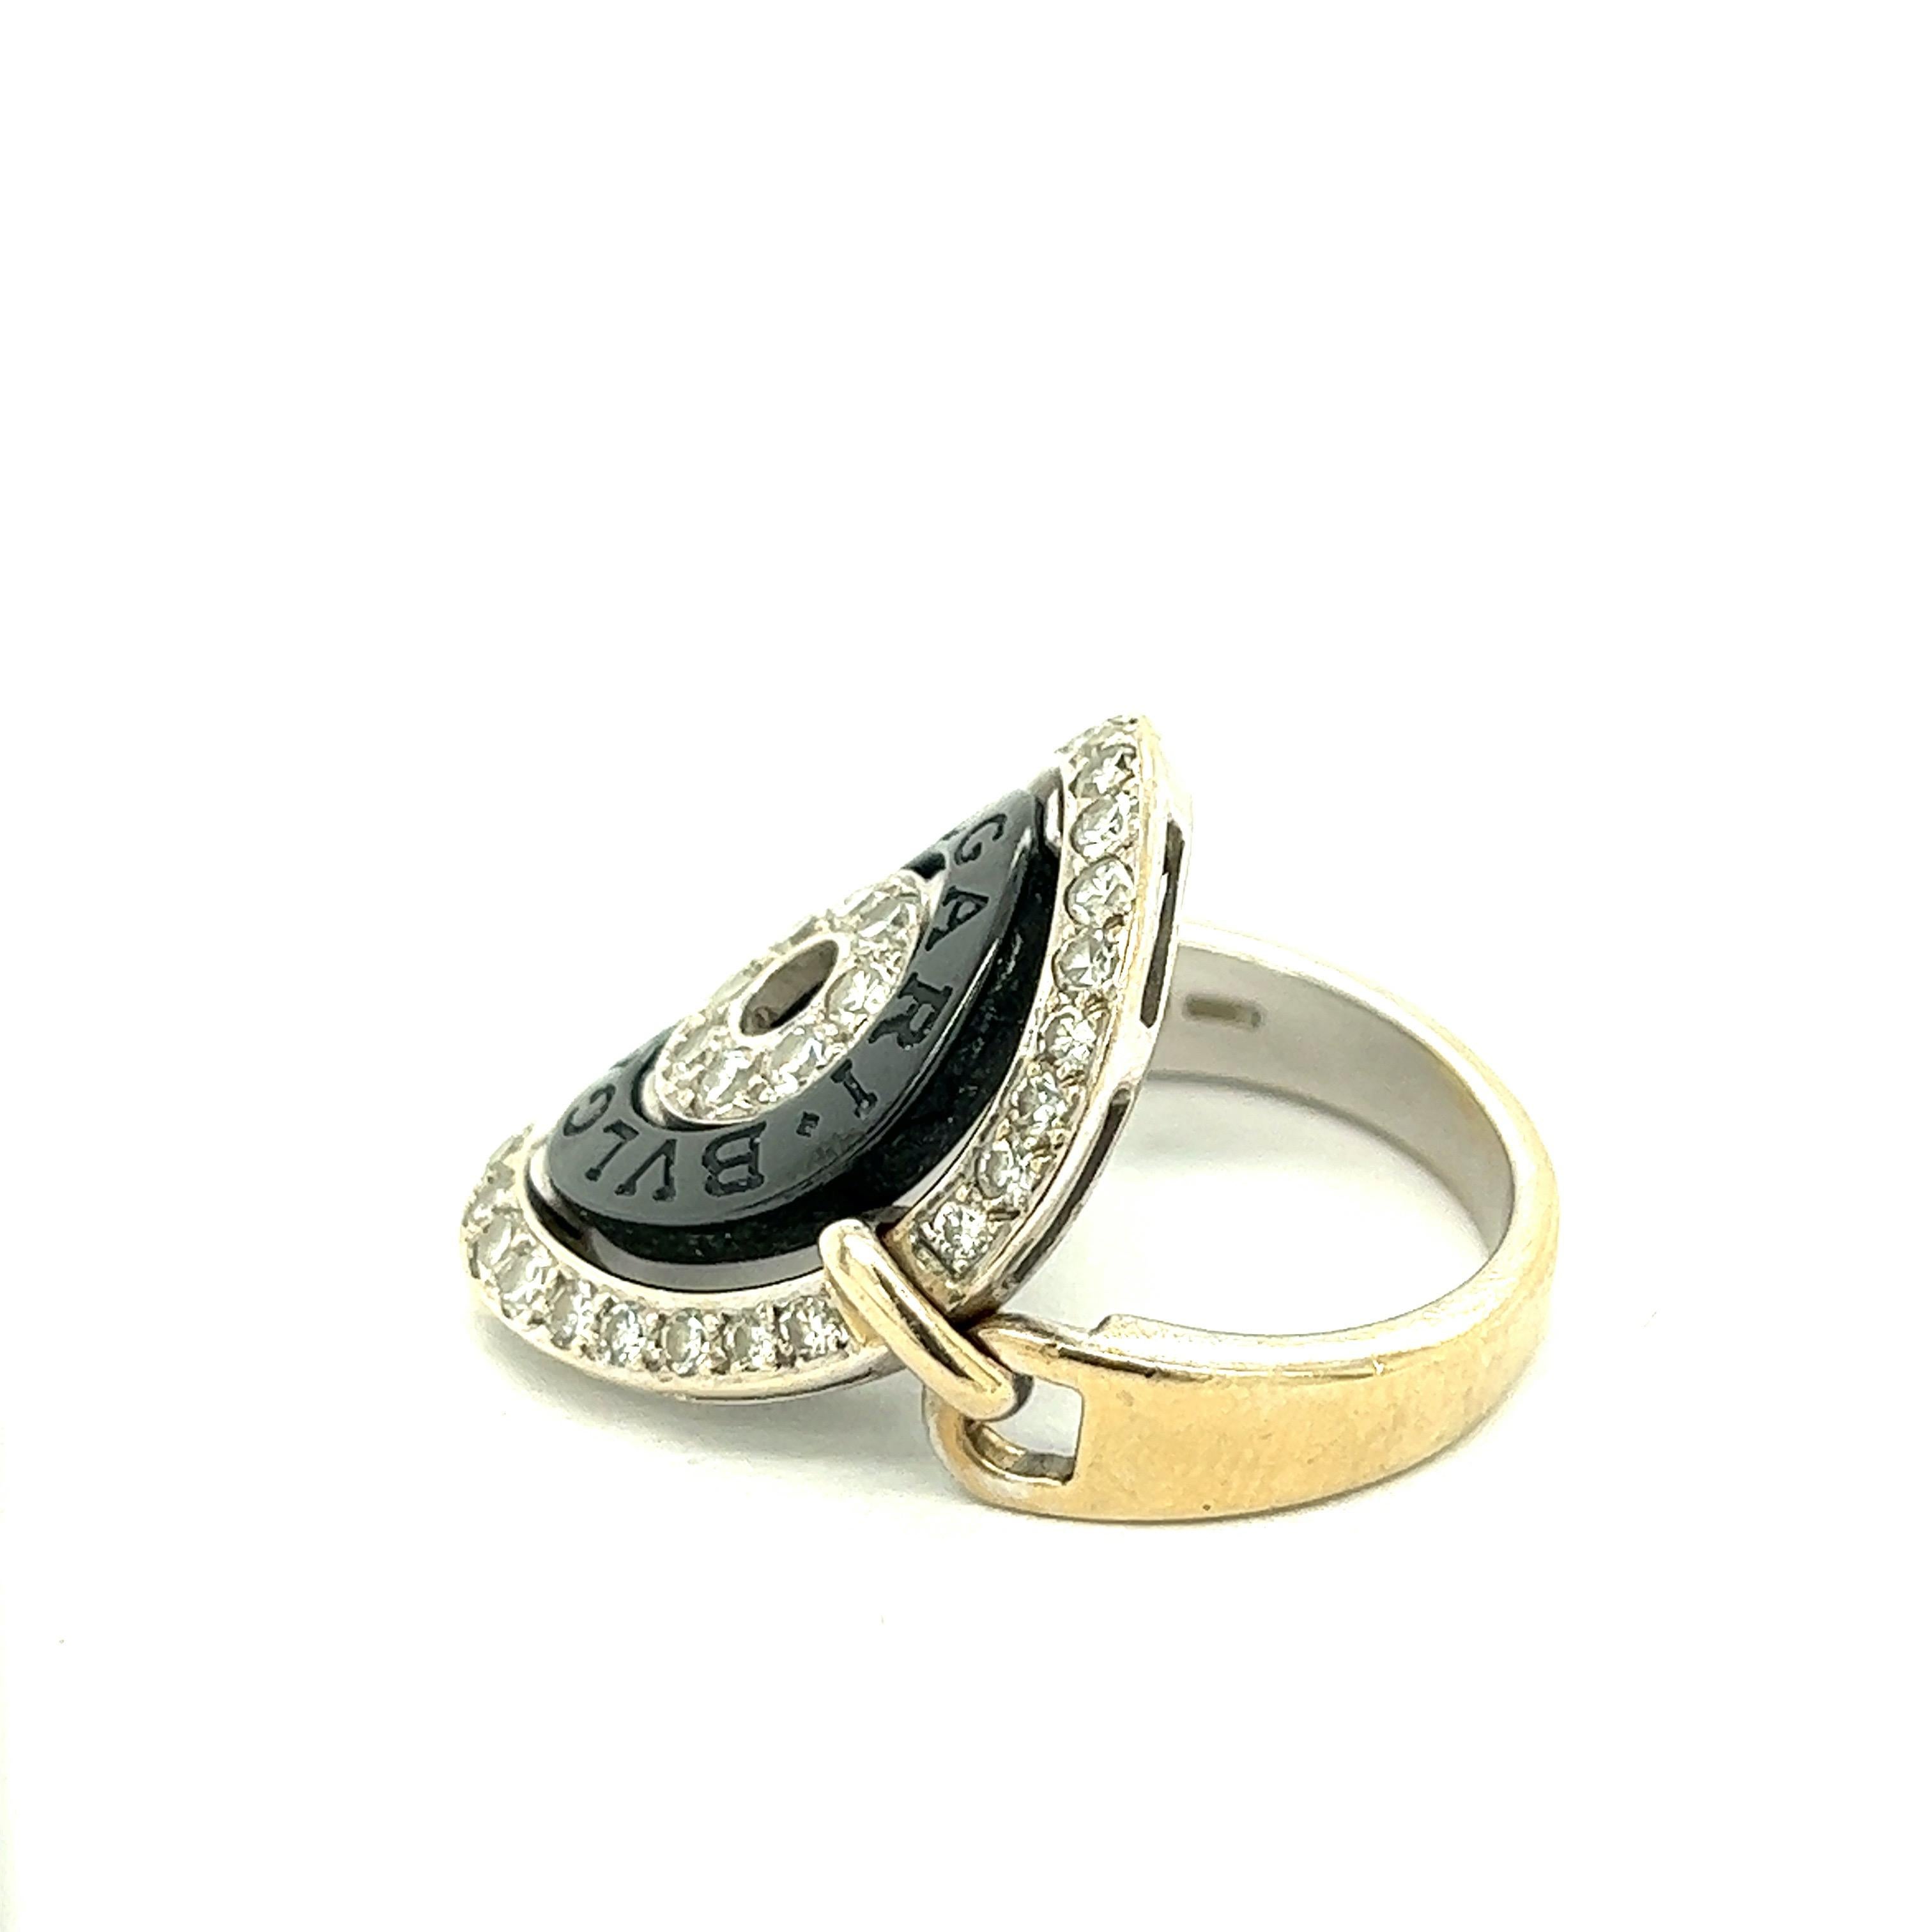 Bvlgari Astrale Movable 18k White Gold Diamond Ring For Sale 2